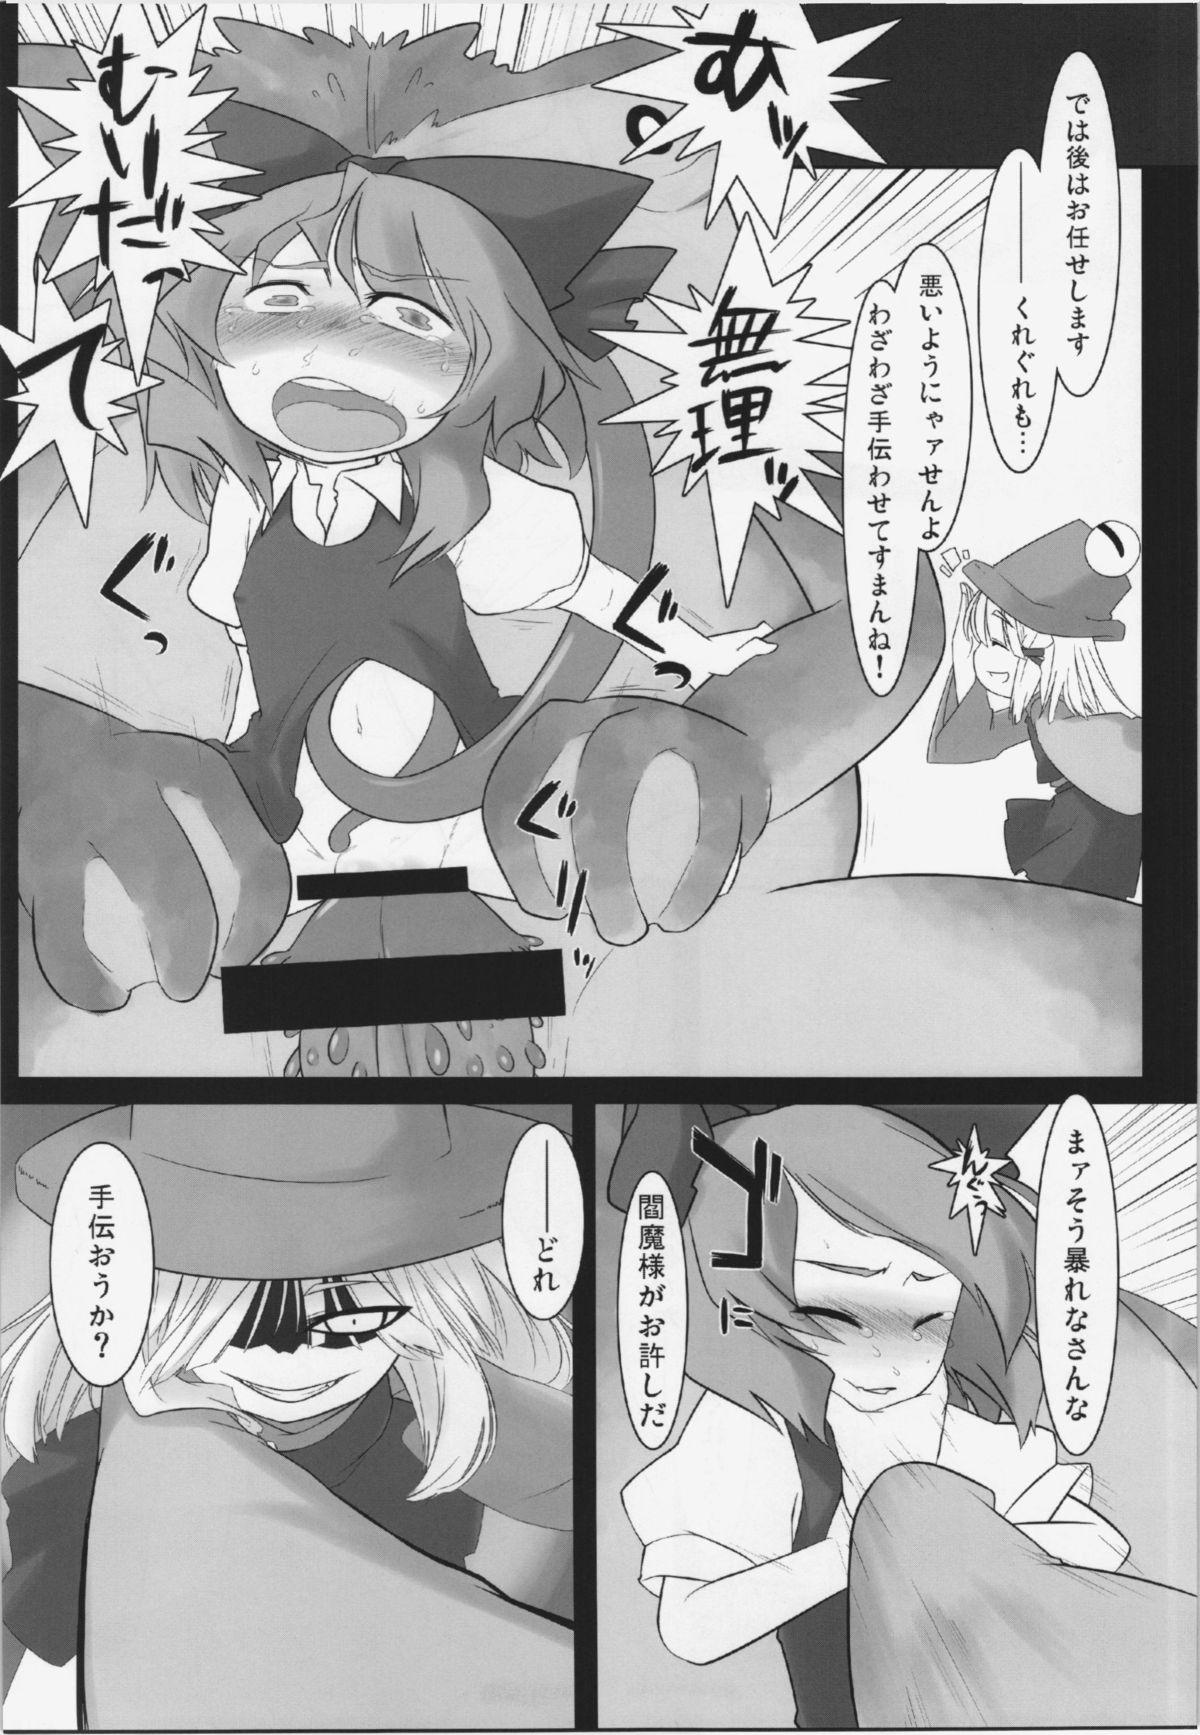 Piss WORKAHOLIC - Touhou project Blacks - Page 6